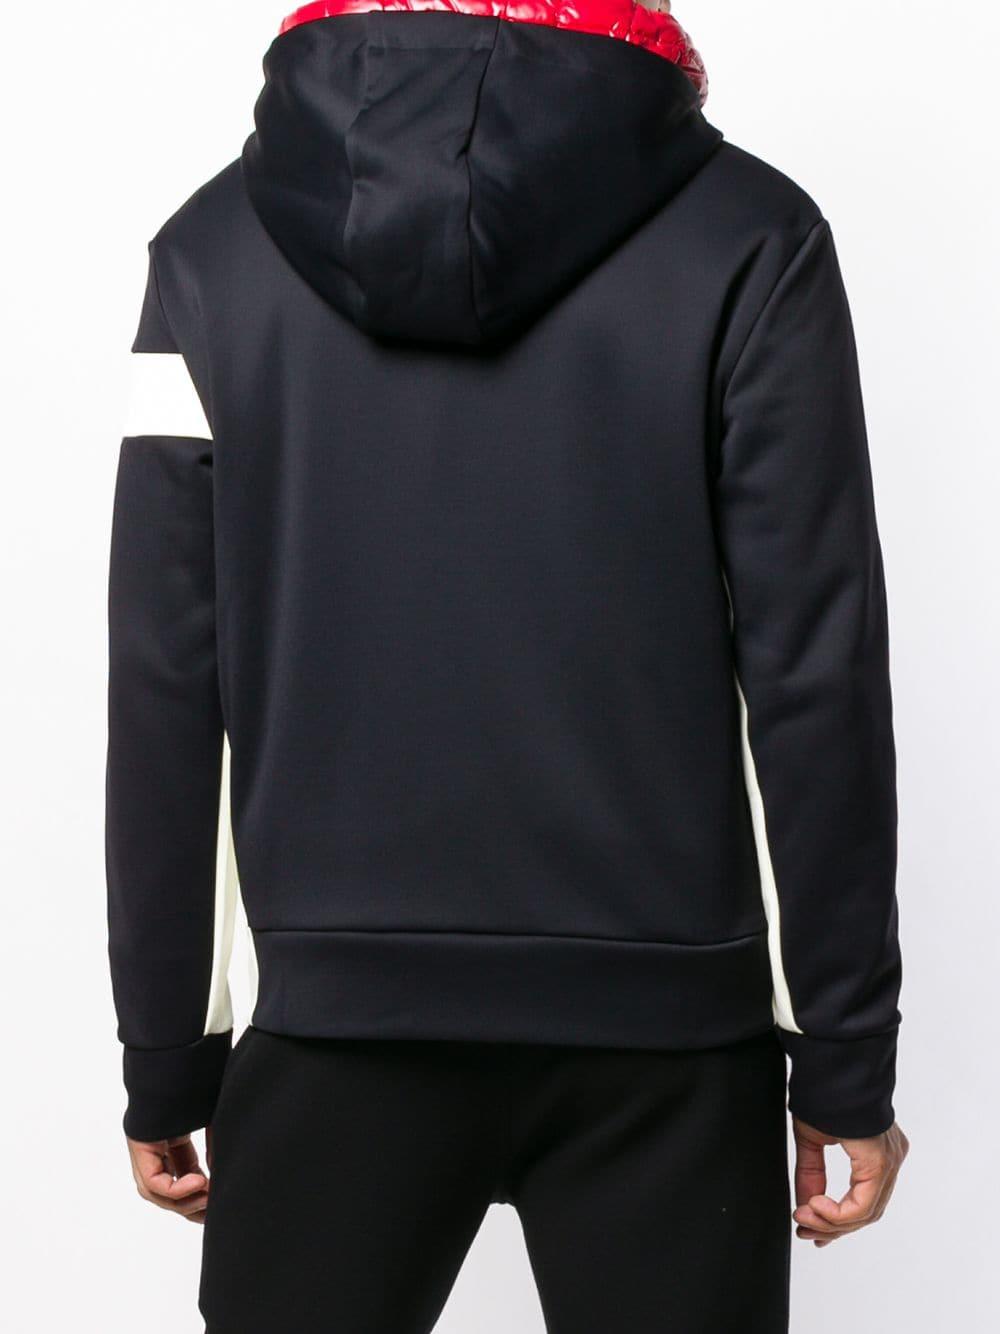 3 MONCLER GRENOBLE Synthetic Zipped Logo Hoodie in Black for Men - Lyst